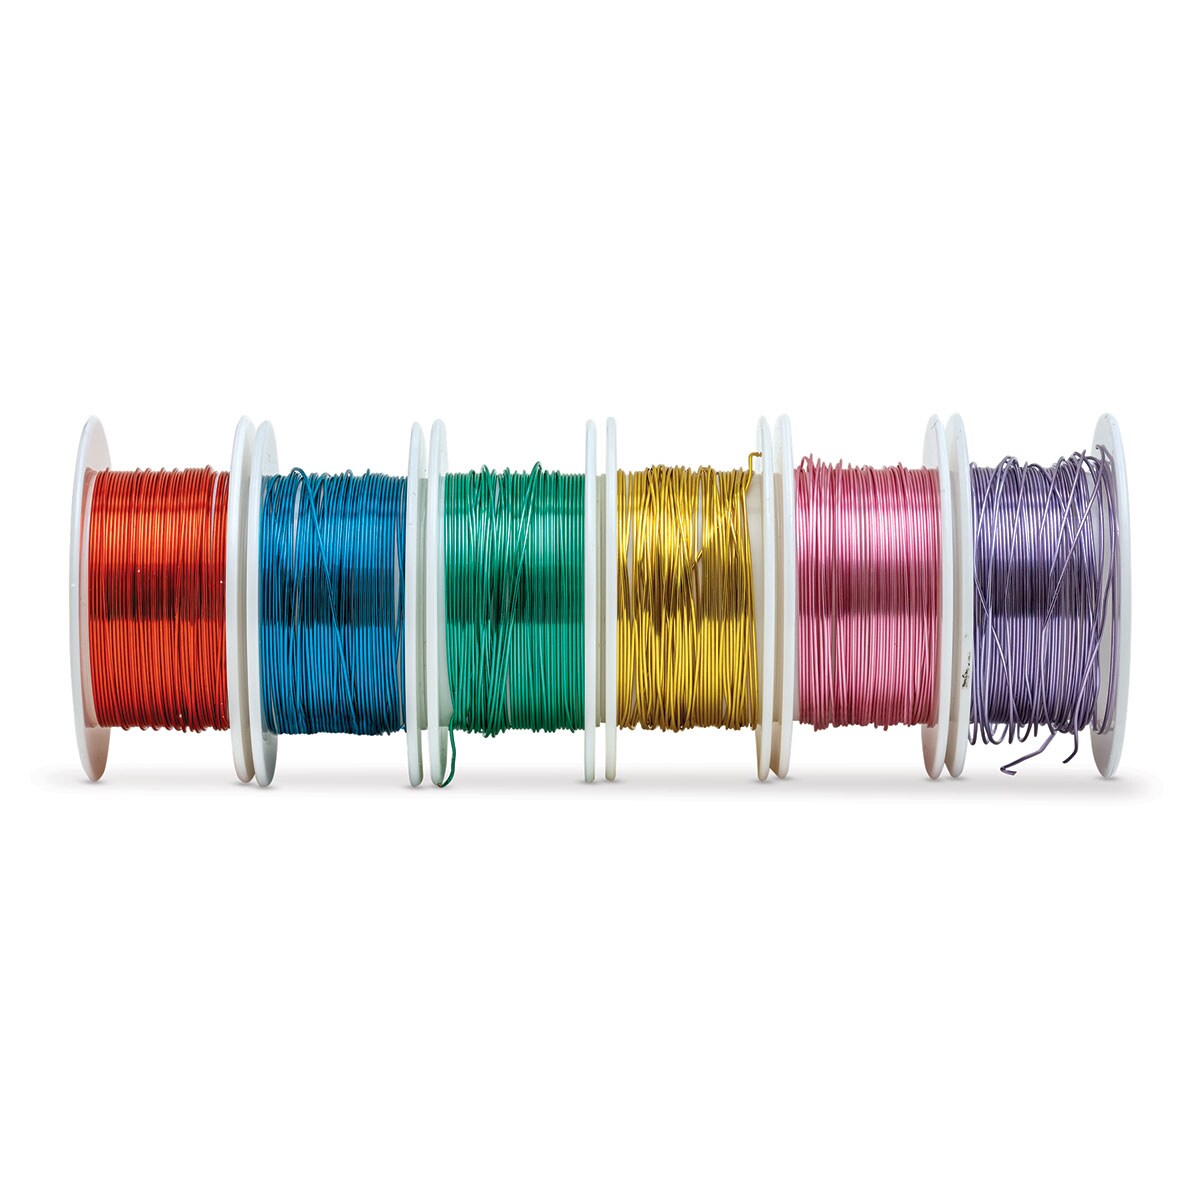 Silver Plated Copper Wire - Bright Colors, Set of 6 Spools, 26 Gauge x 15 ft